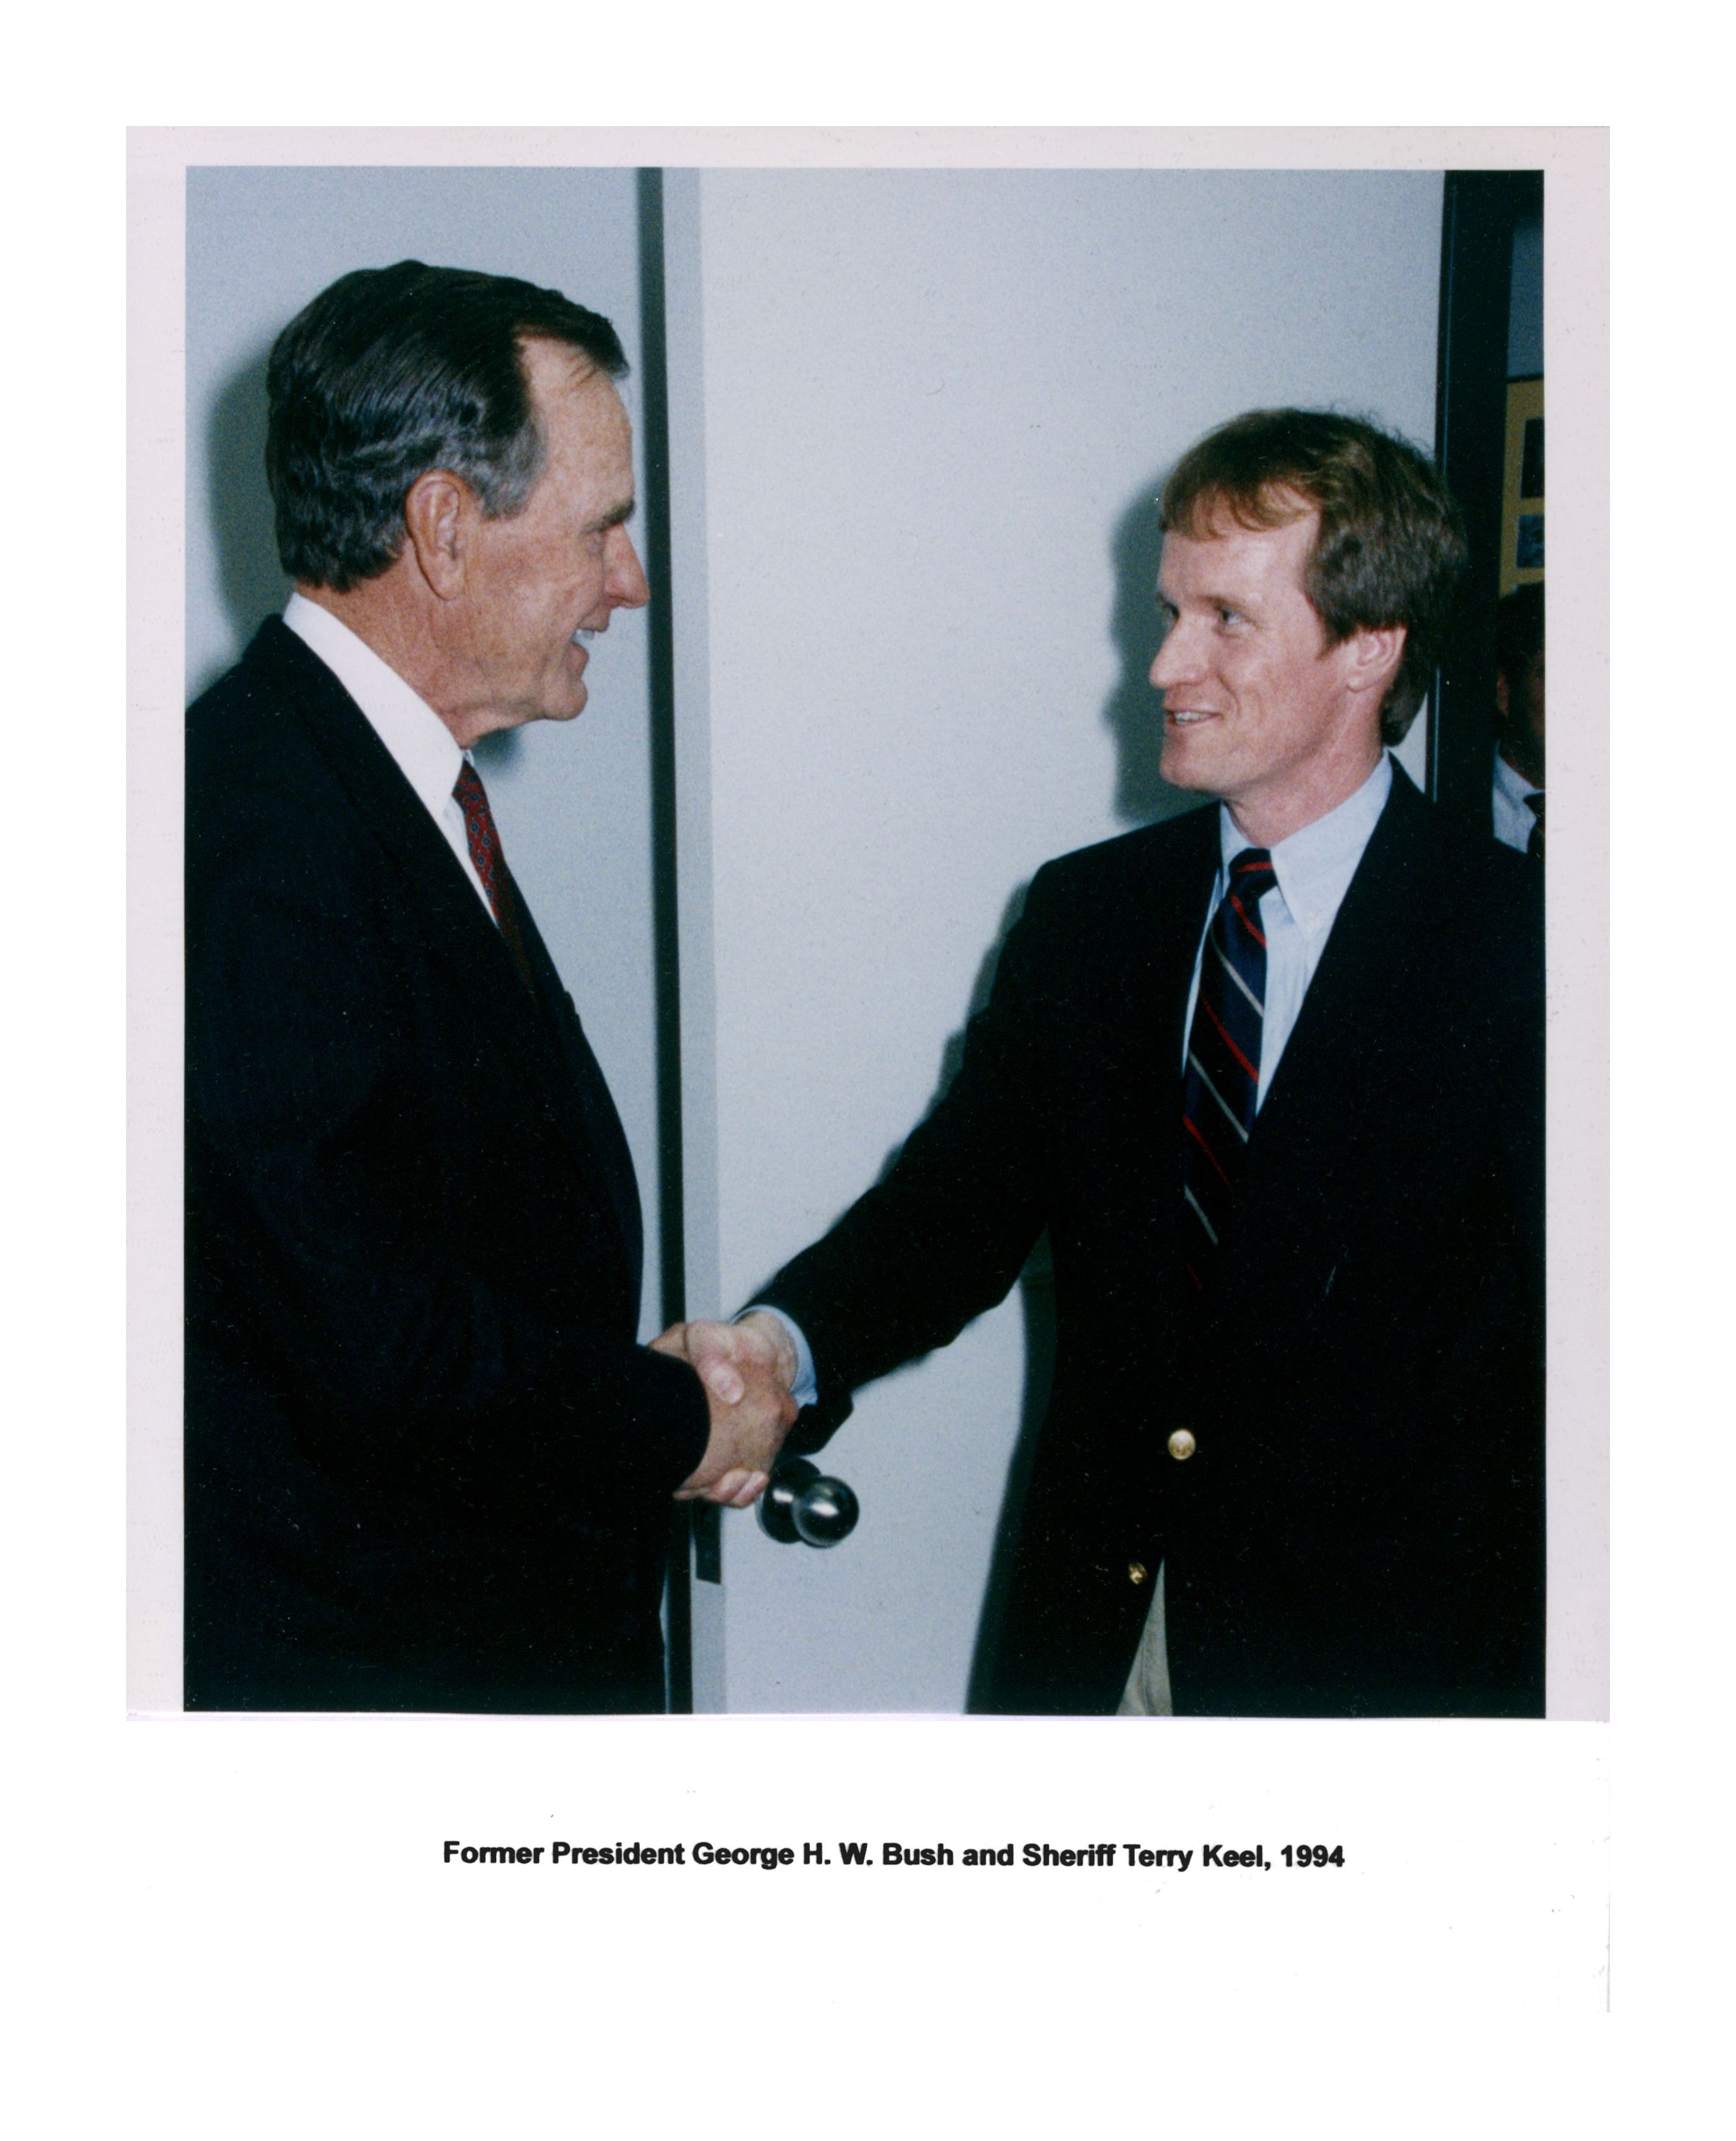 Former President George H.W. Bush and Sheriff Terry Keel, 1994. Photo courtesy of Terry Keel